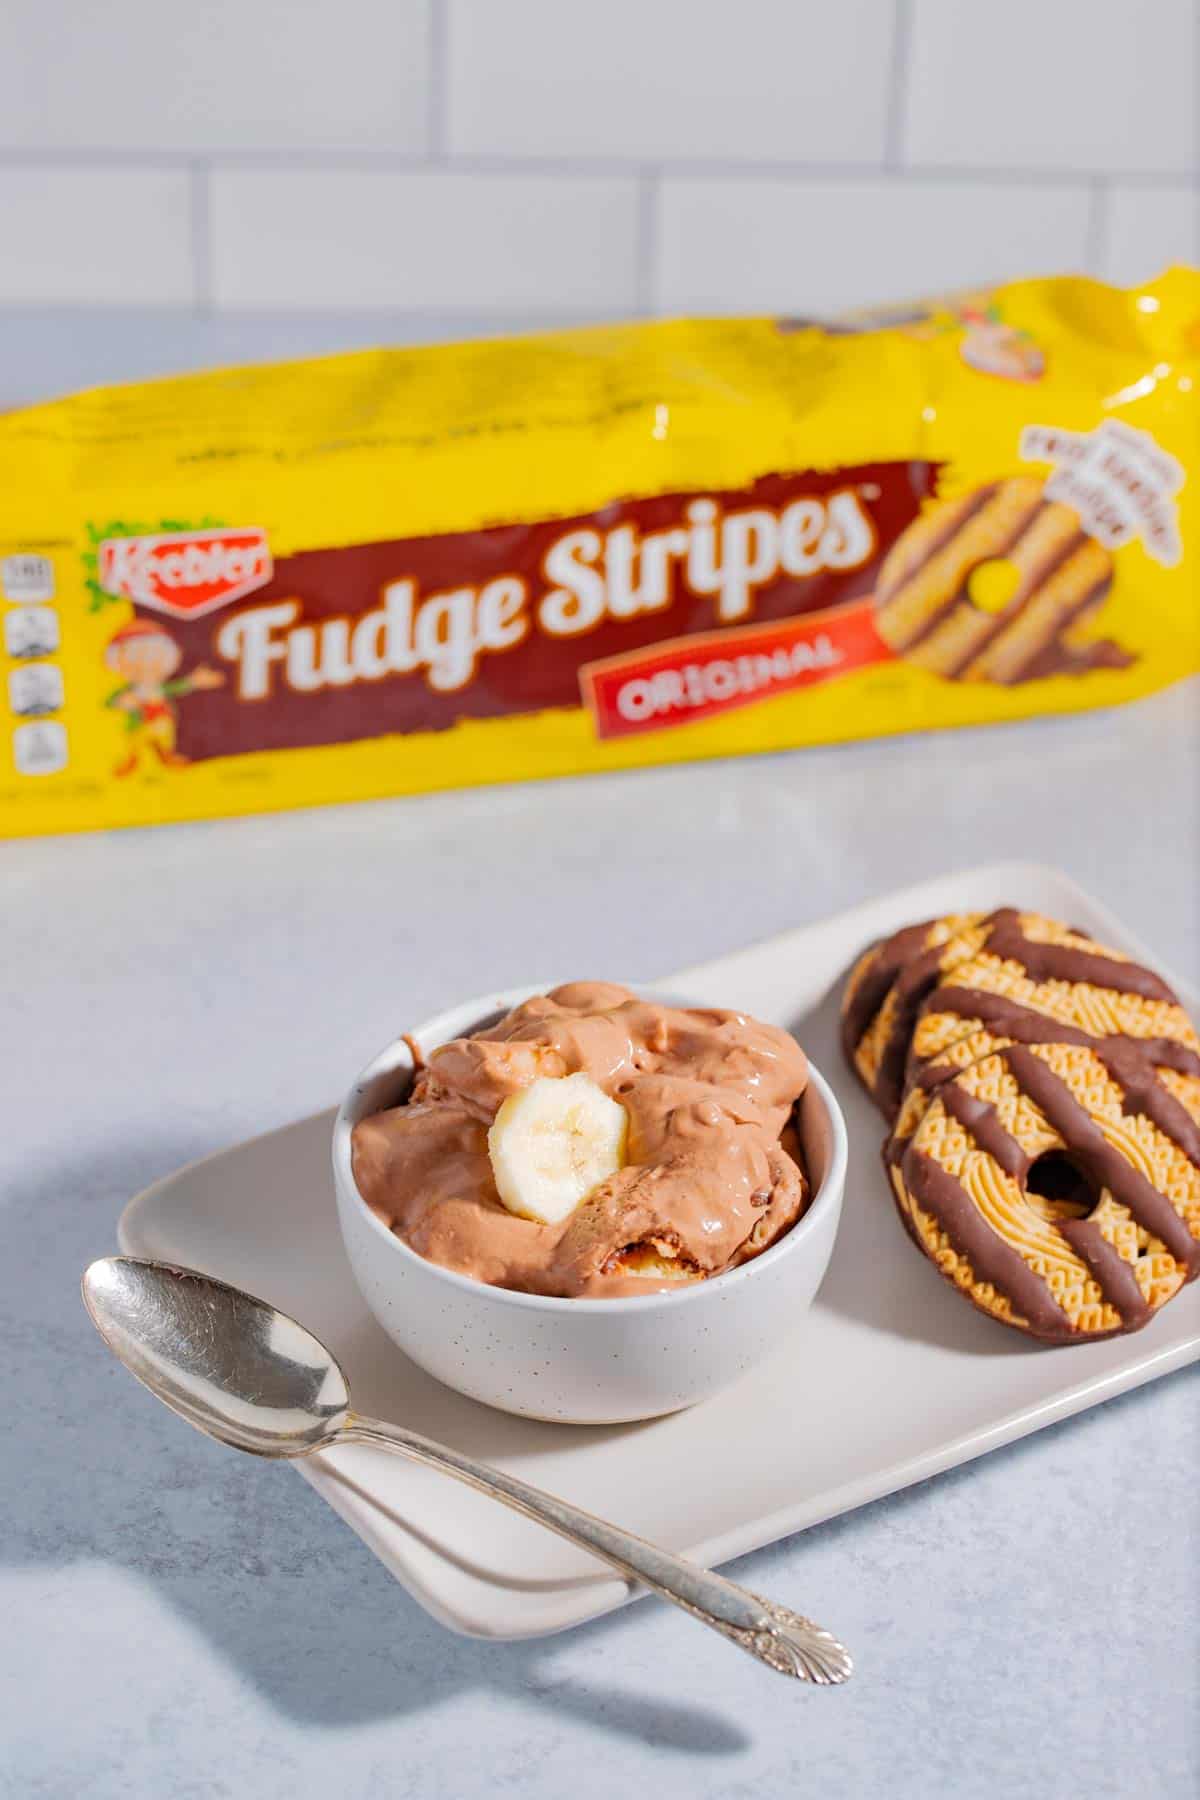 A bowl of banana pudding made with fudge stripe cookies with a package of fudge stripe cookies in the background.